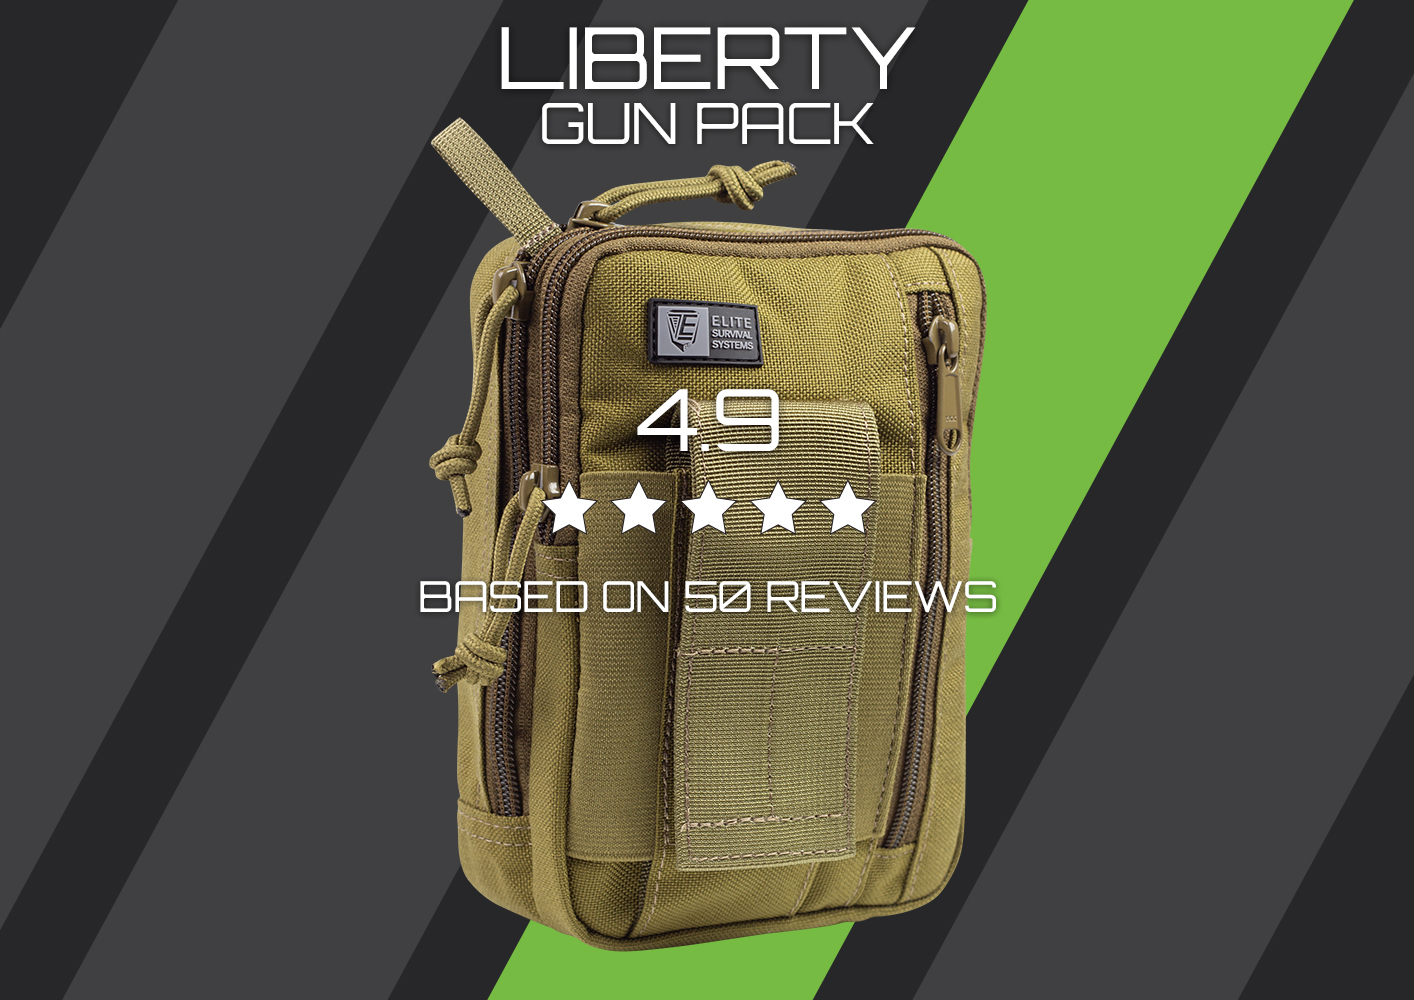 Elite Survival Liberty Gun Pack - Concealed Carry Holster Pack for Active Lifestyles. Lightweight and Durable Design. Buy Now for Secure Carry!